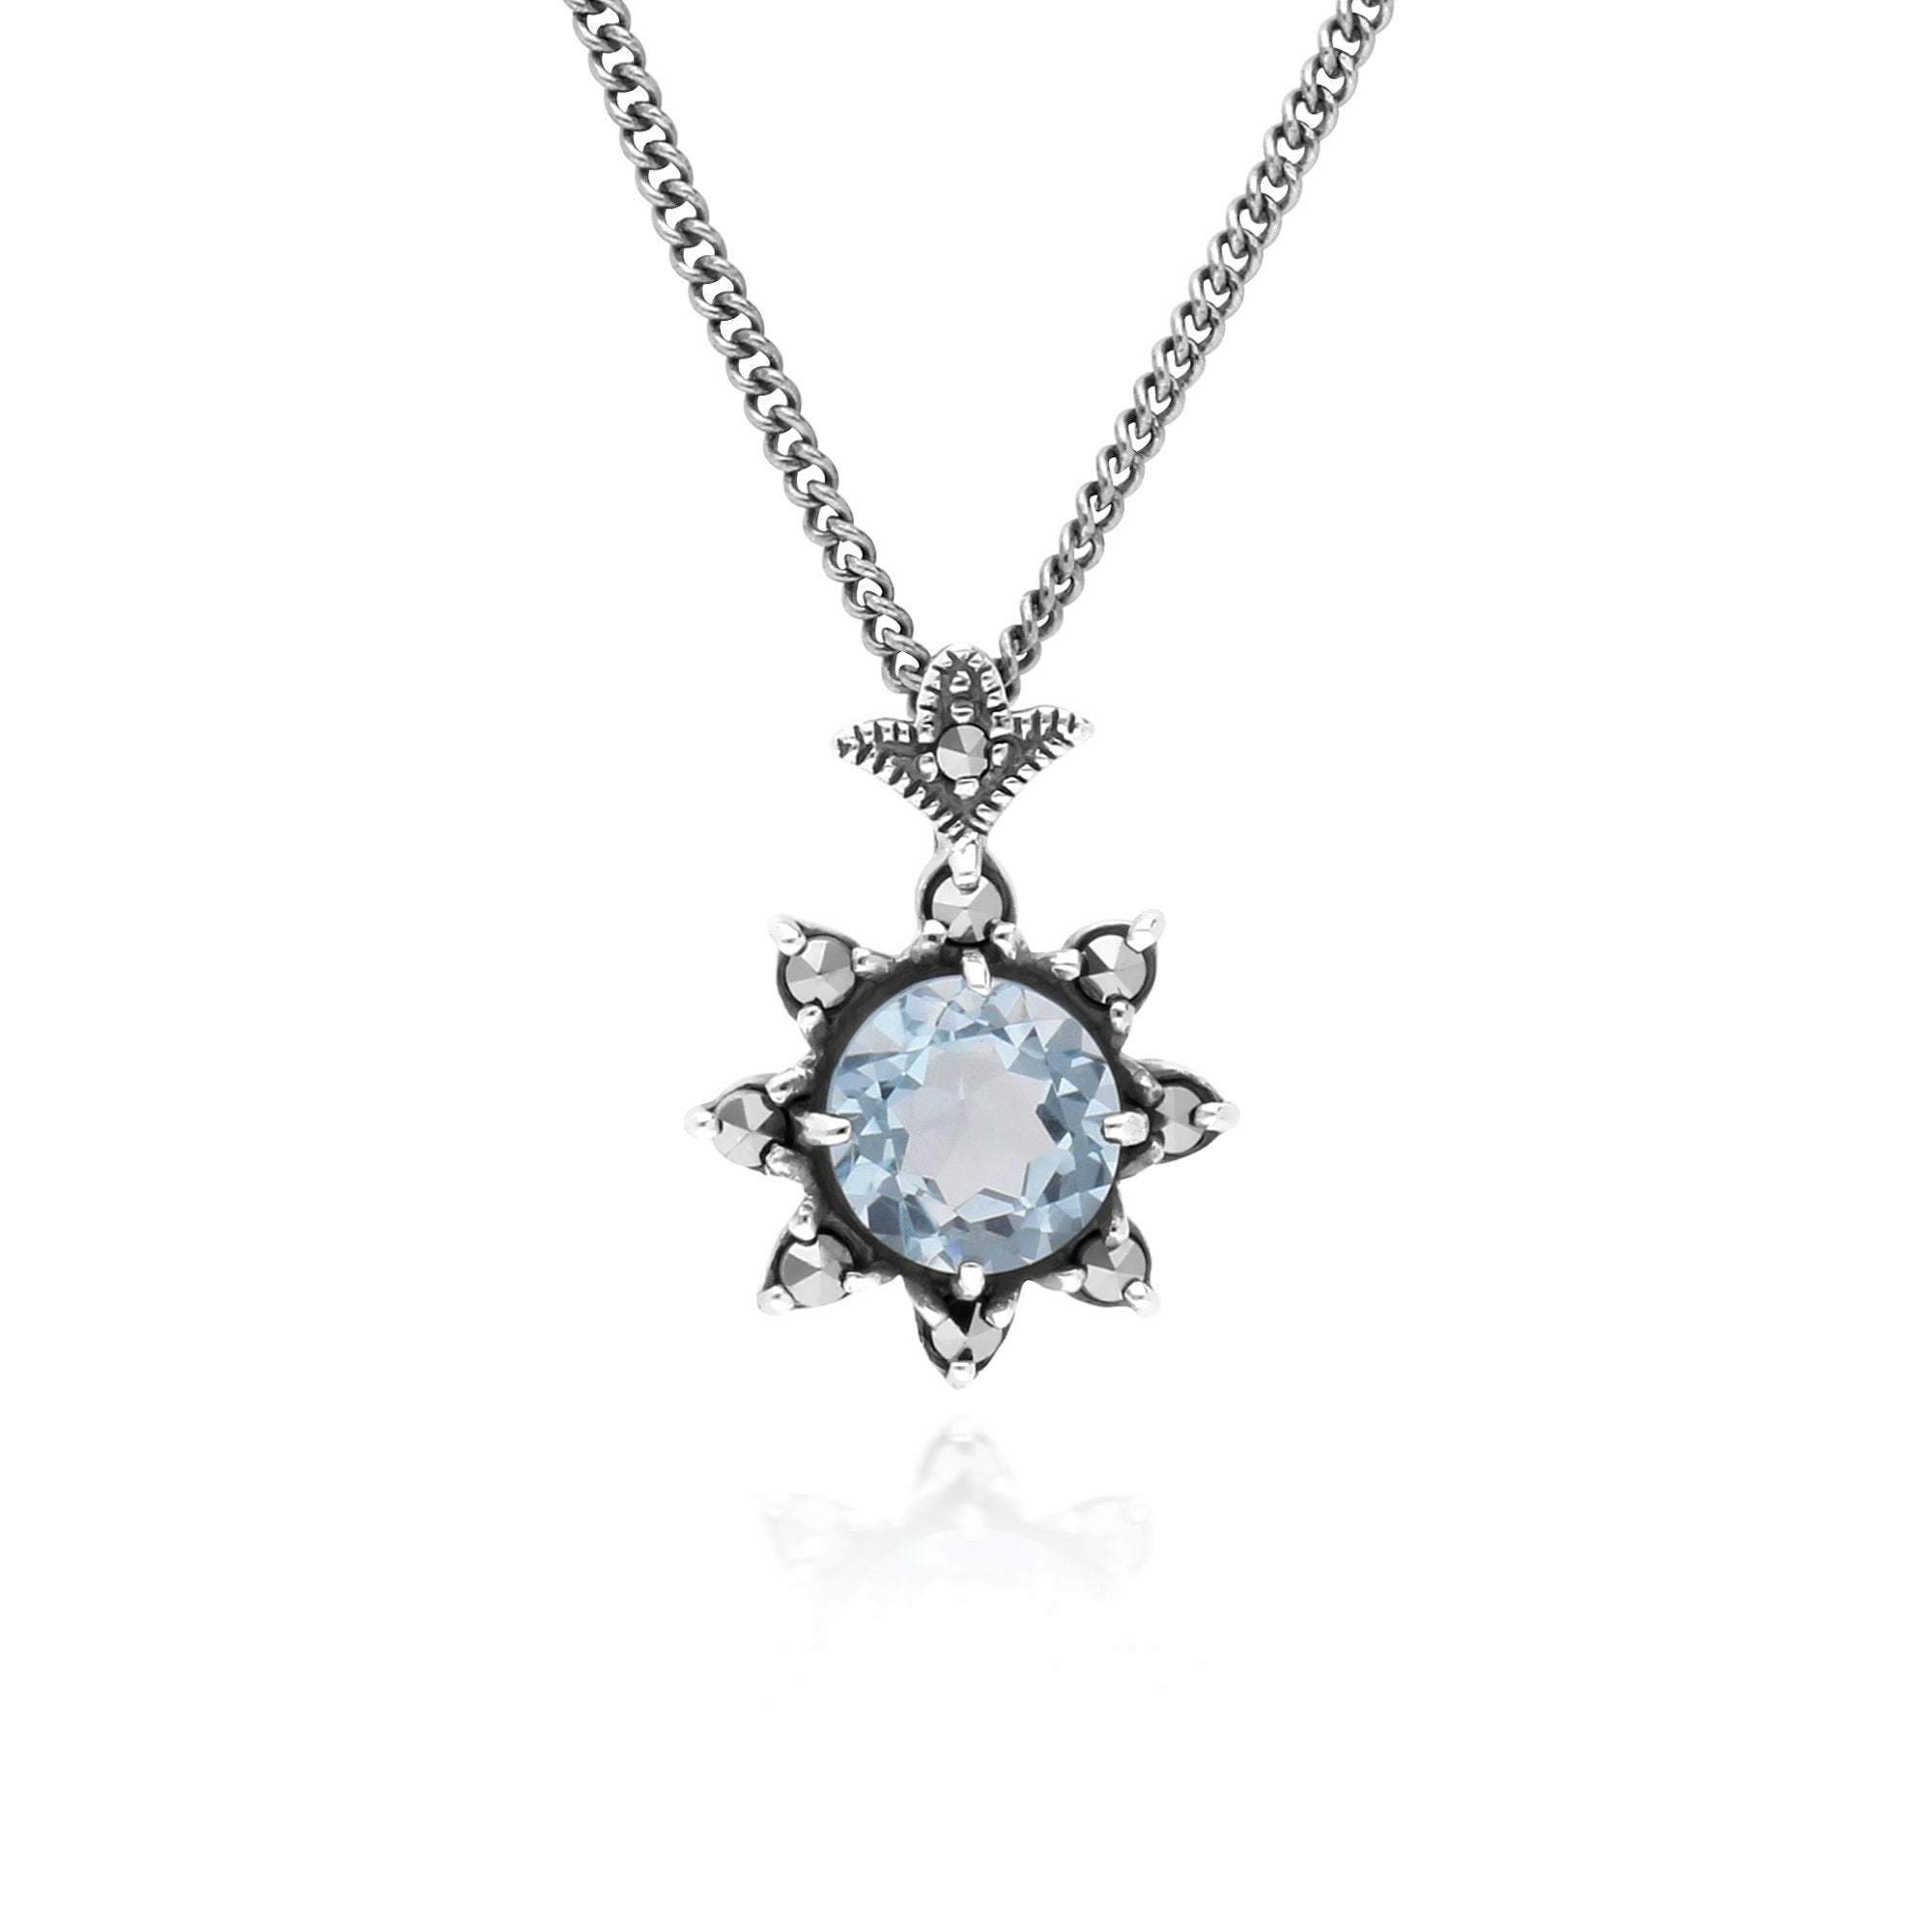 Floral Round Blue Topaz & Marcasite Pendant in 925 Sterling Silver